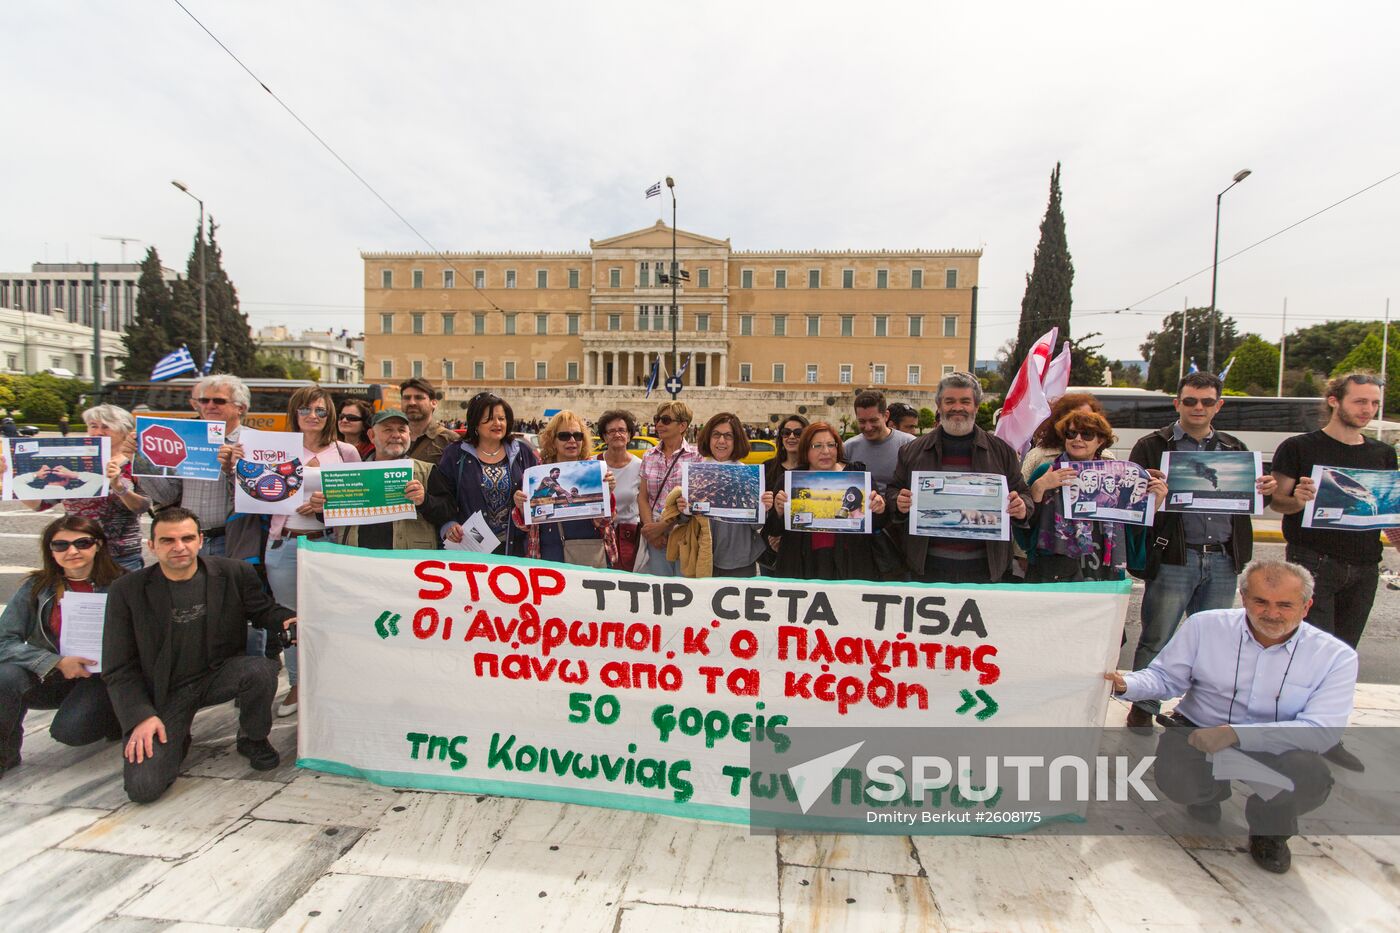 Protests in Europe against Transatlantic Trade and Investment Partnership (TTIP)